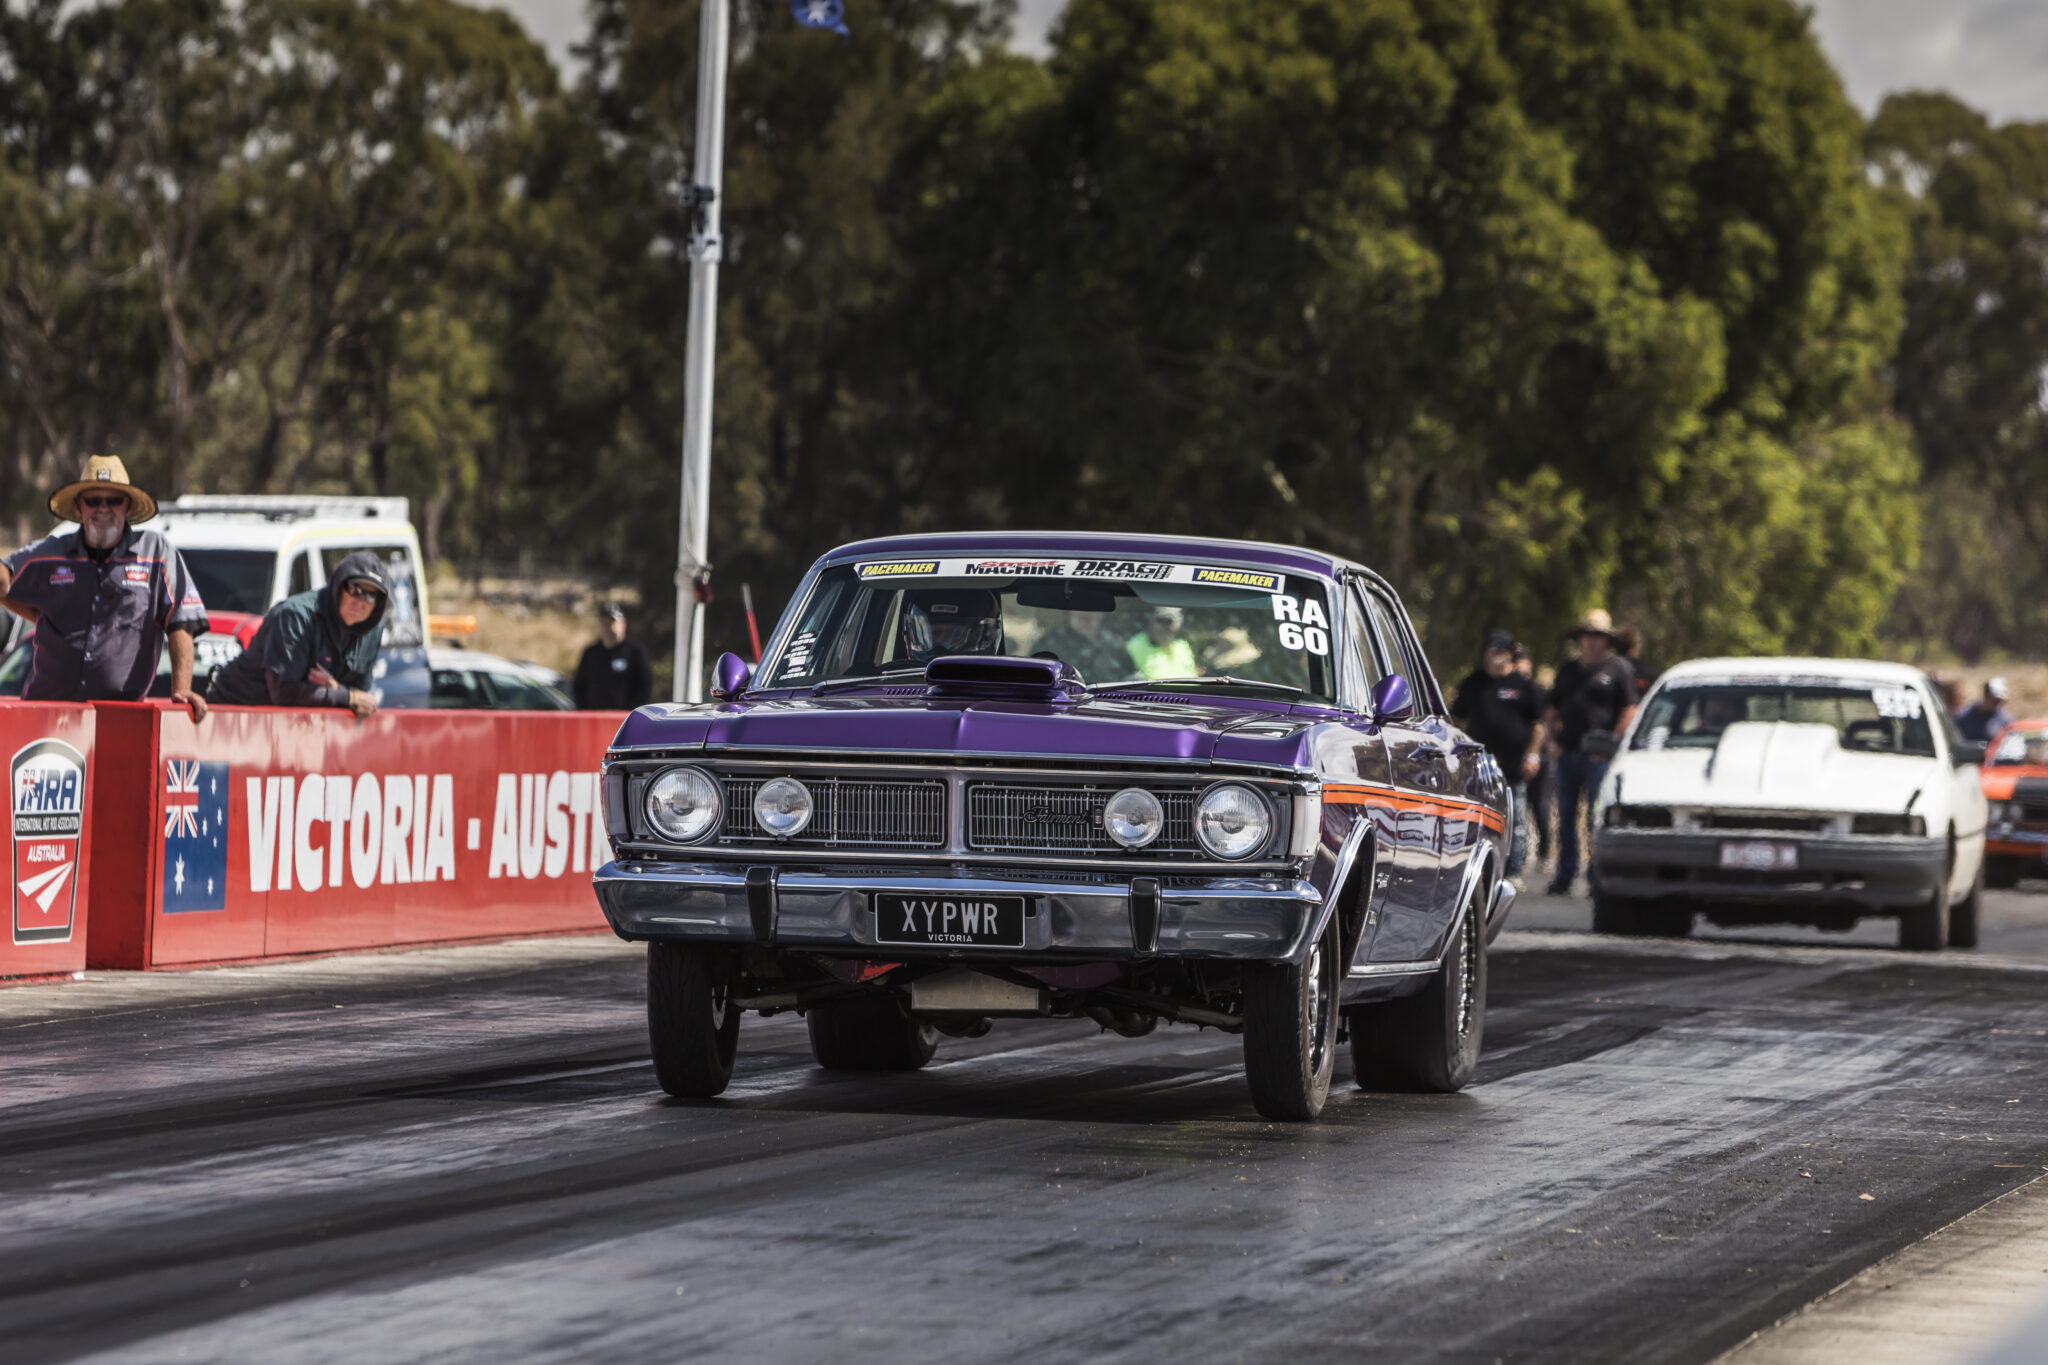 905hp Clevor-powered XY Fairmont ready for Pacemaker Radial Aspirated action